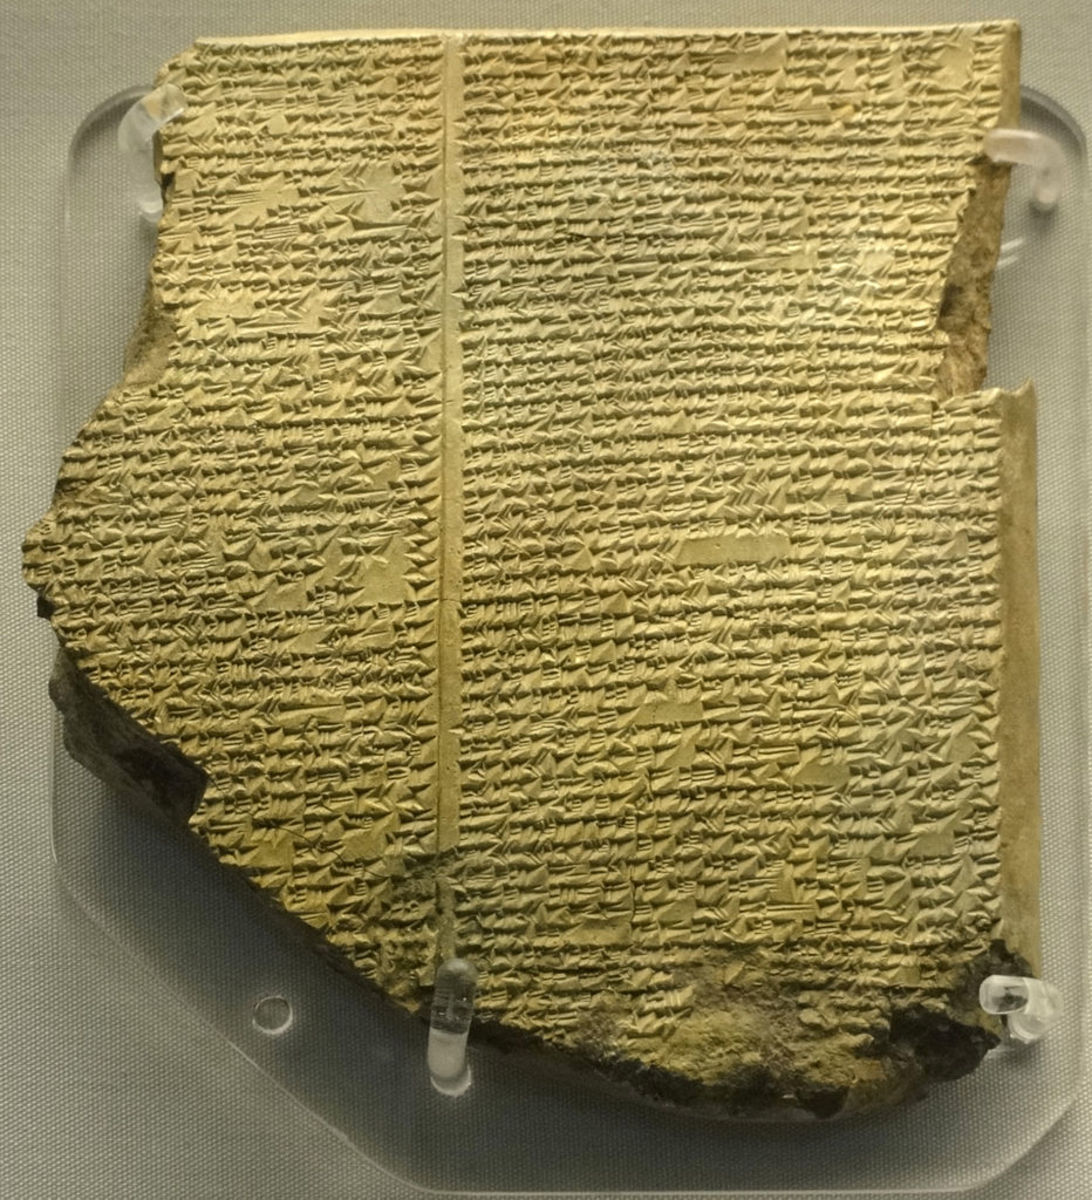 The cuneiform clay tablet holding the story of Uta-Napishti, who survived the Deluge. It was written over a thousand years before the Bible.